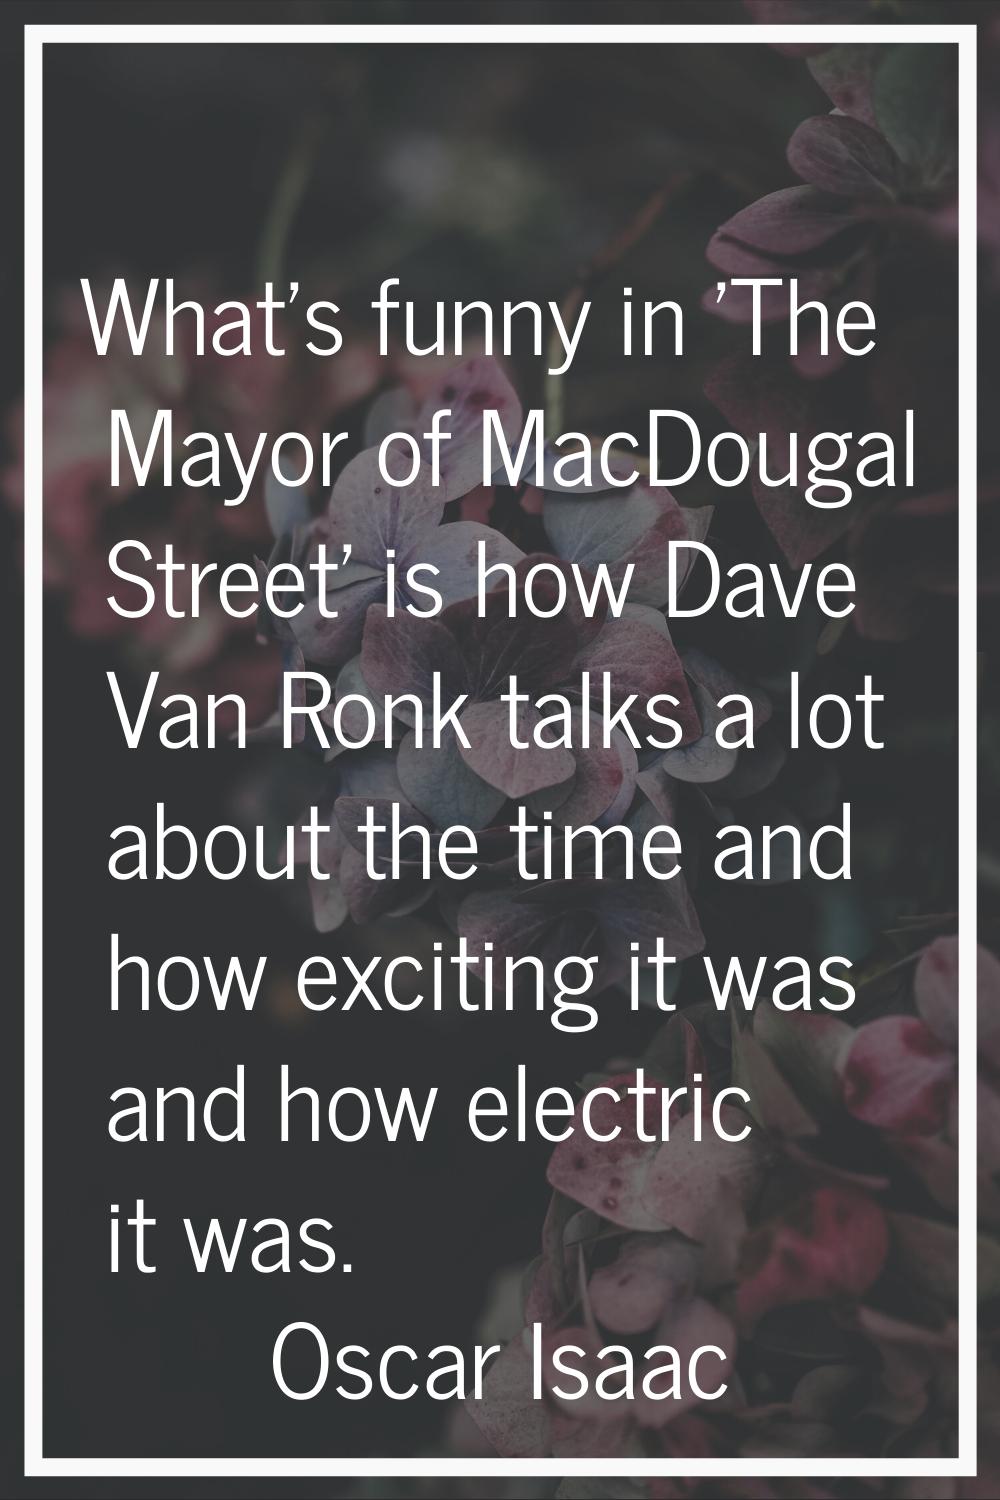 What's funny in 'The Mayor of MacDougal Street' is how Dave Van Ronk talks a lot about the time and